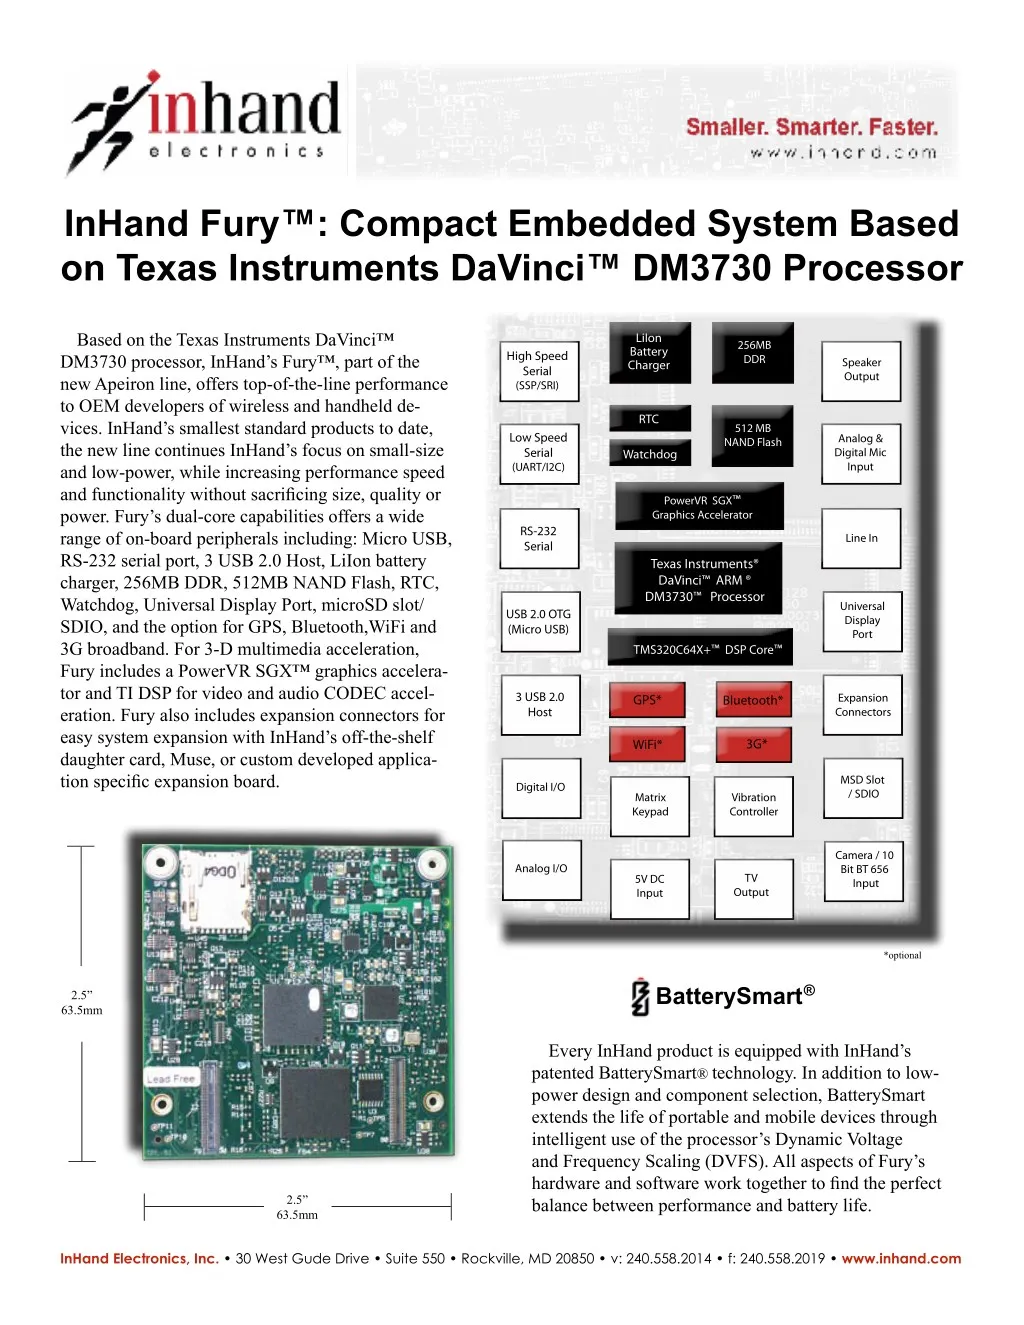 inhand fury compact embedded system based